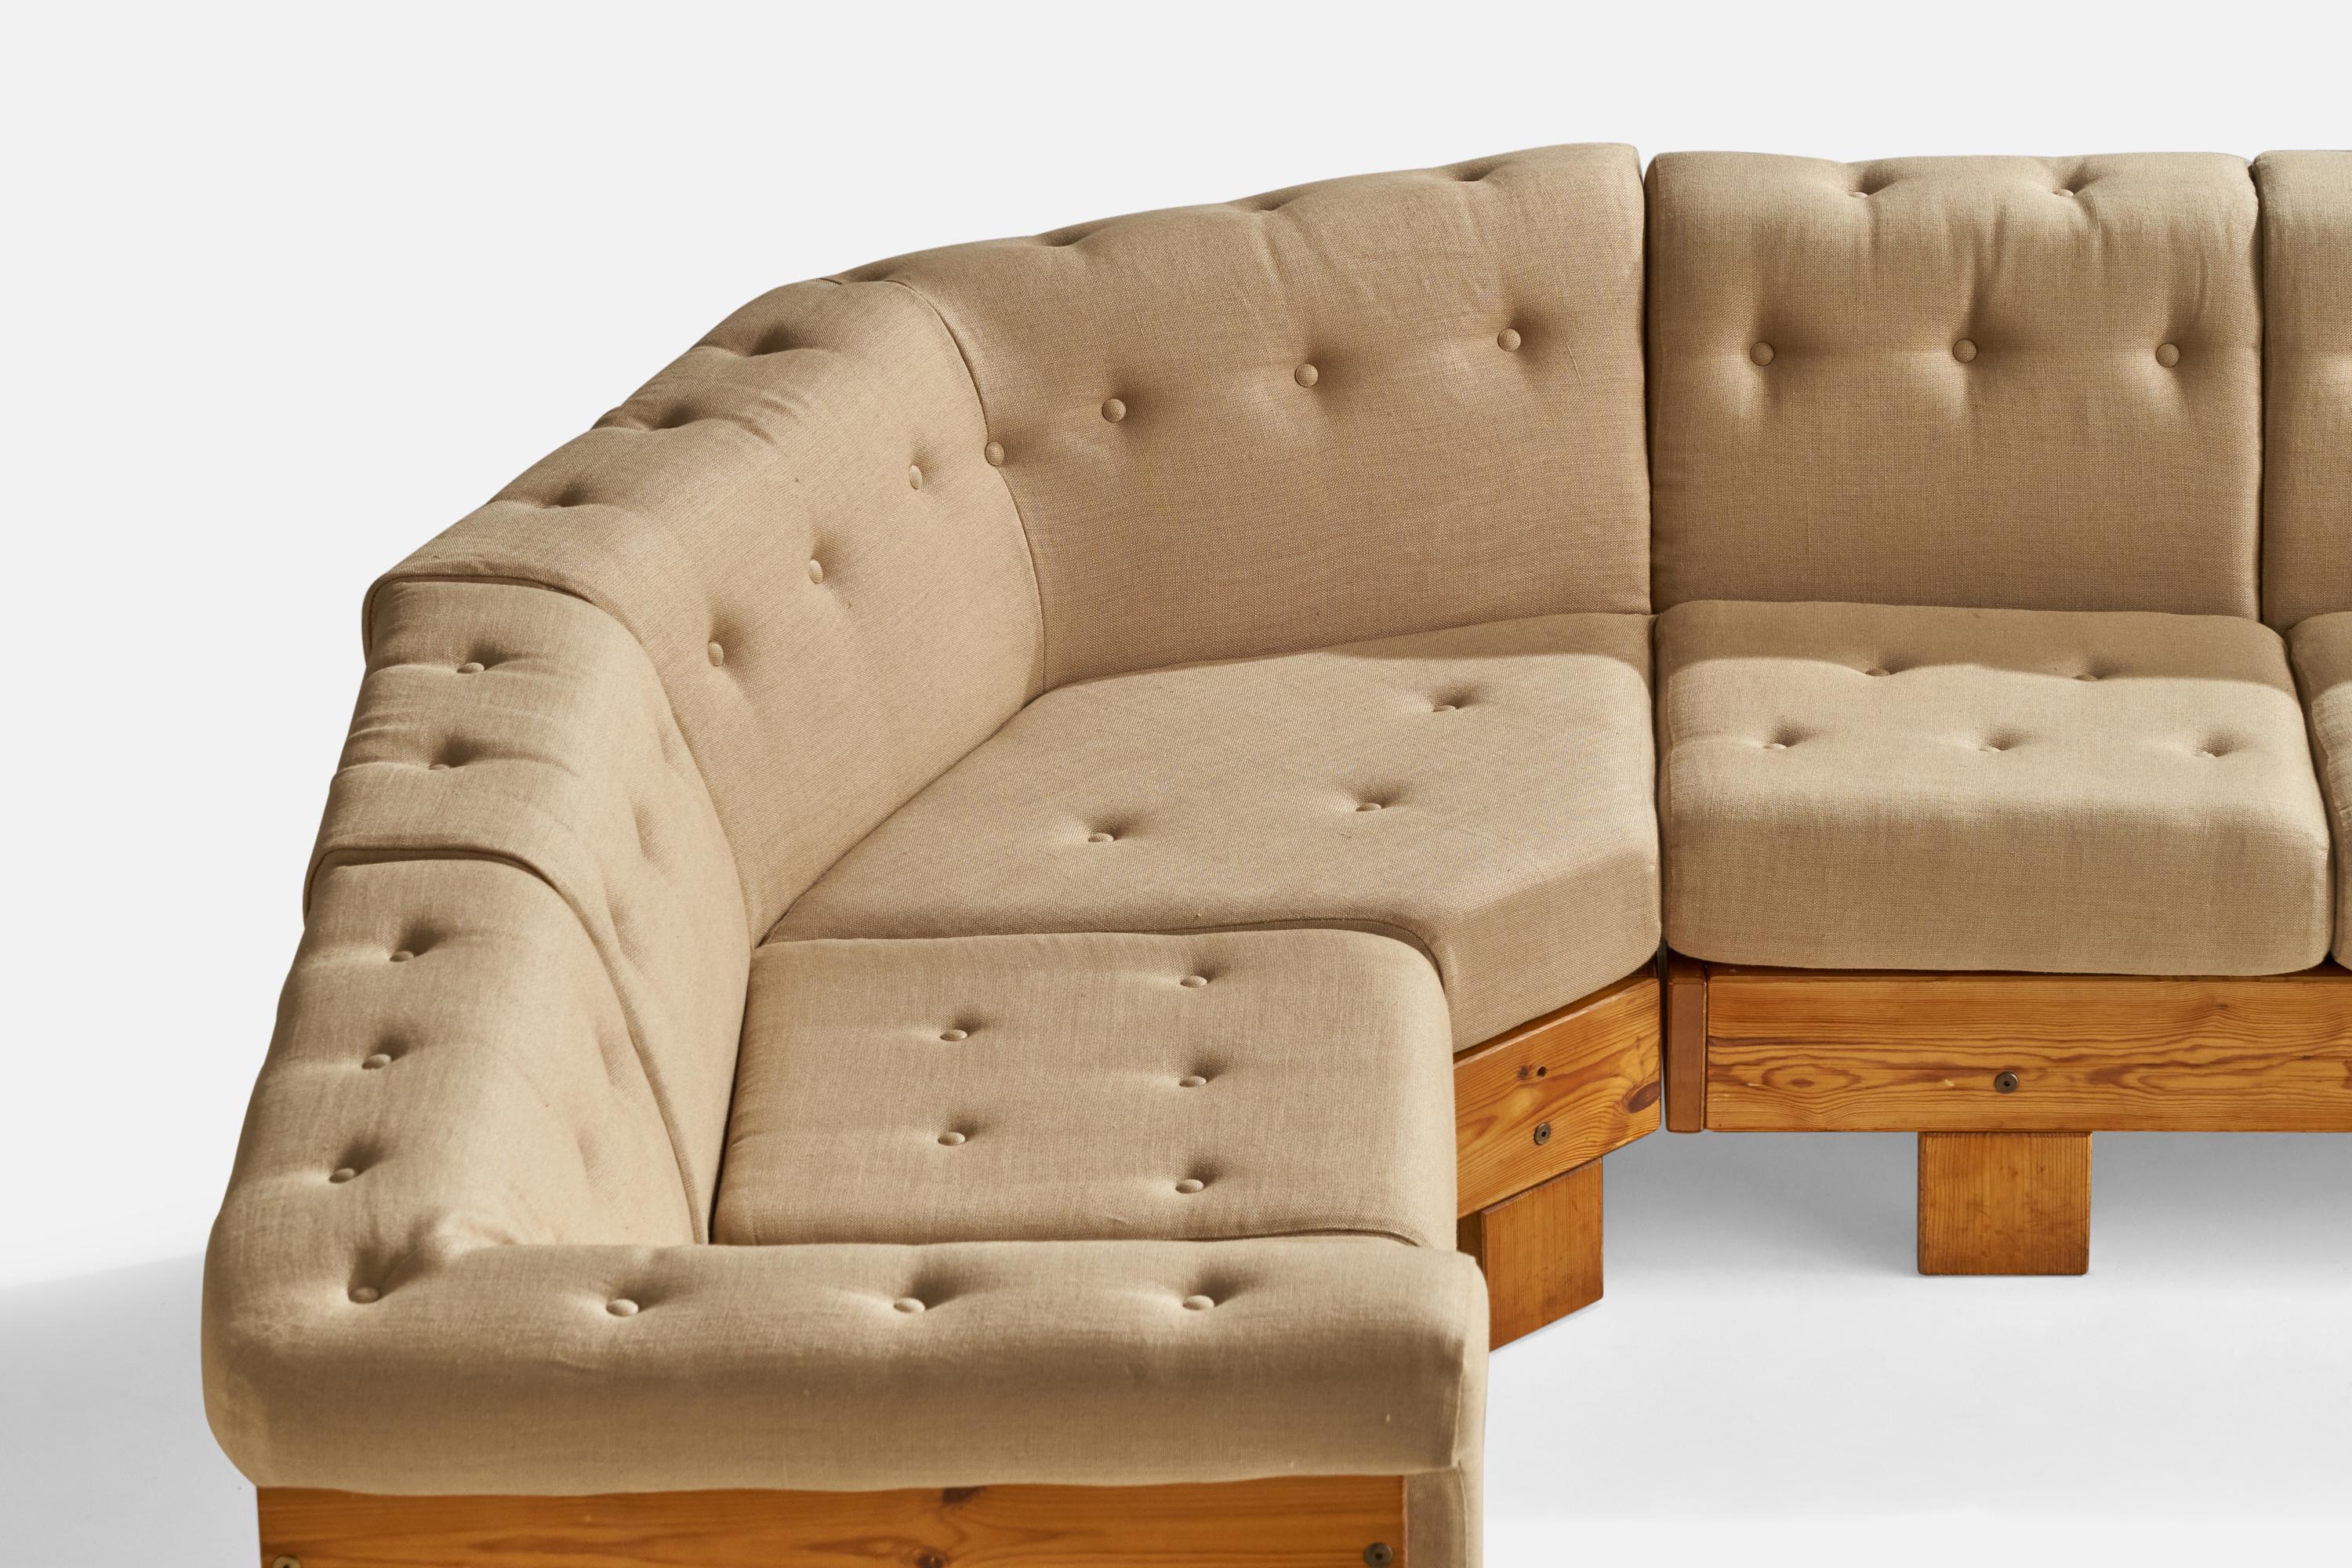 Sven Larsson, Large Sectional Sofa, Pine, Fabric, Sweden, 1970s For Sale 1